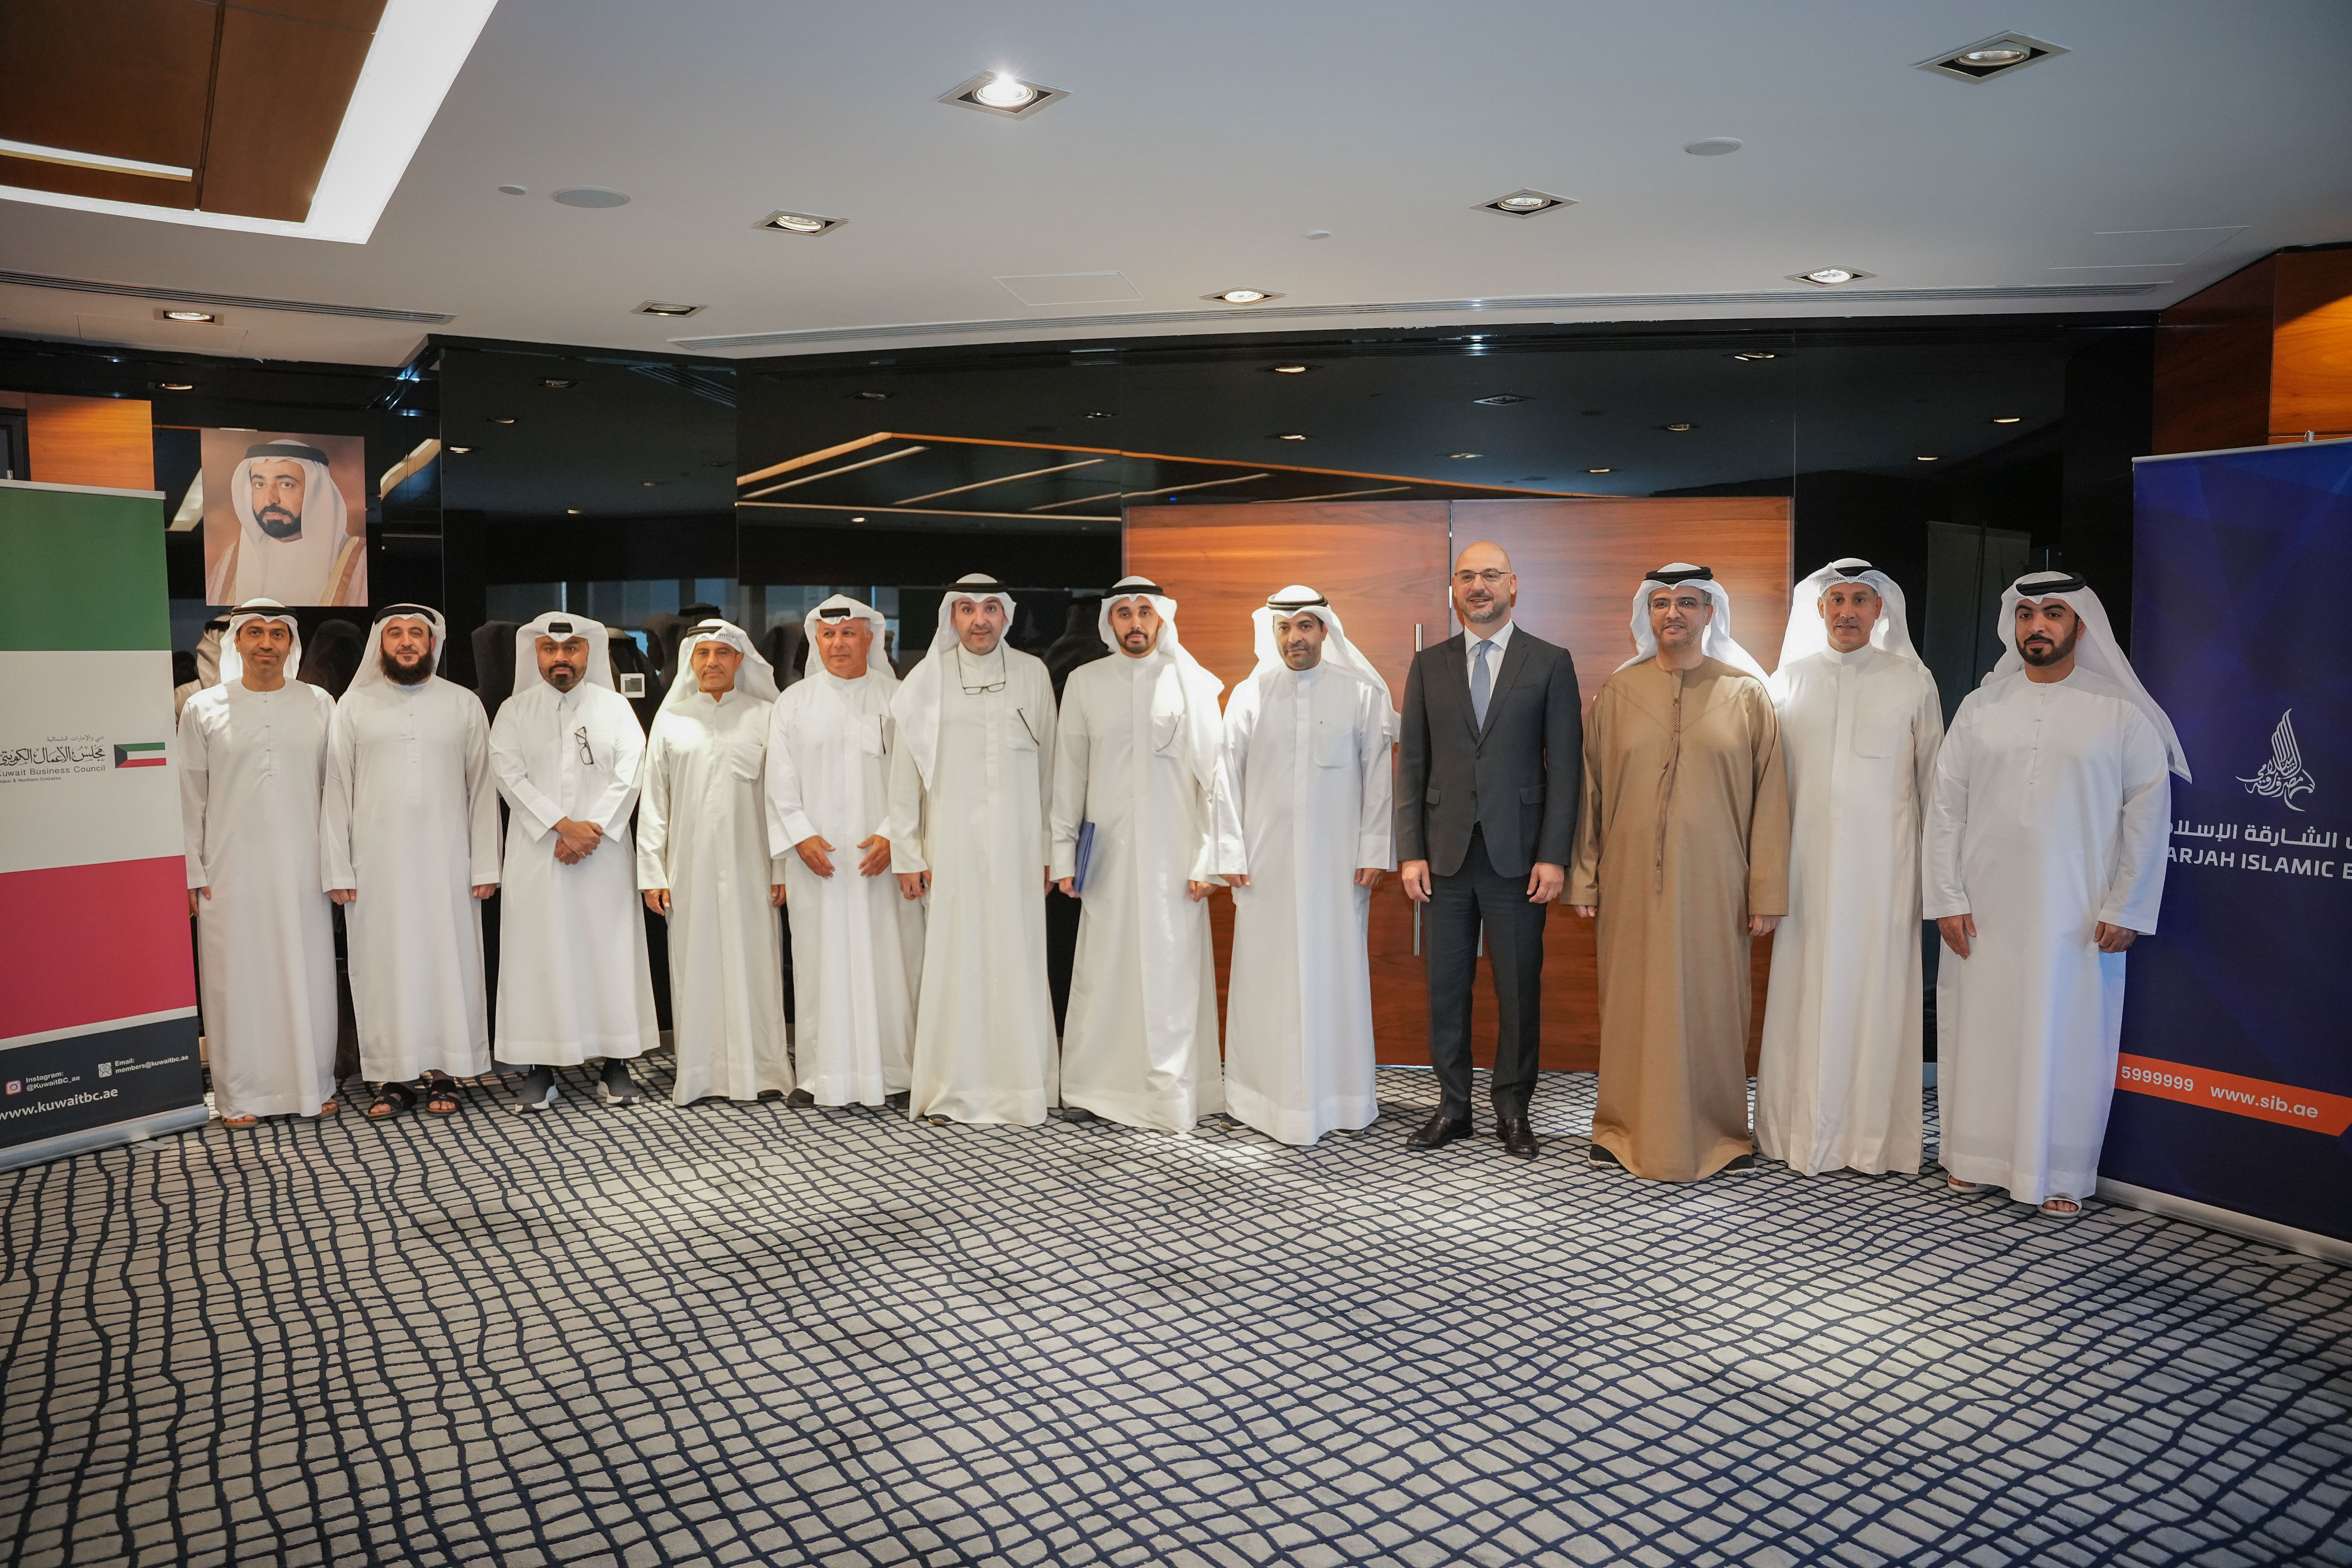 sharjah islamic bank, kuwait business council cooperate to support kuwaiti investments in uae